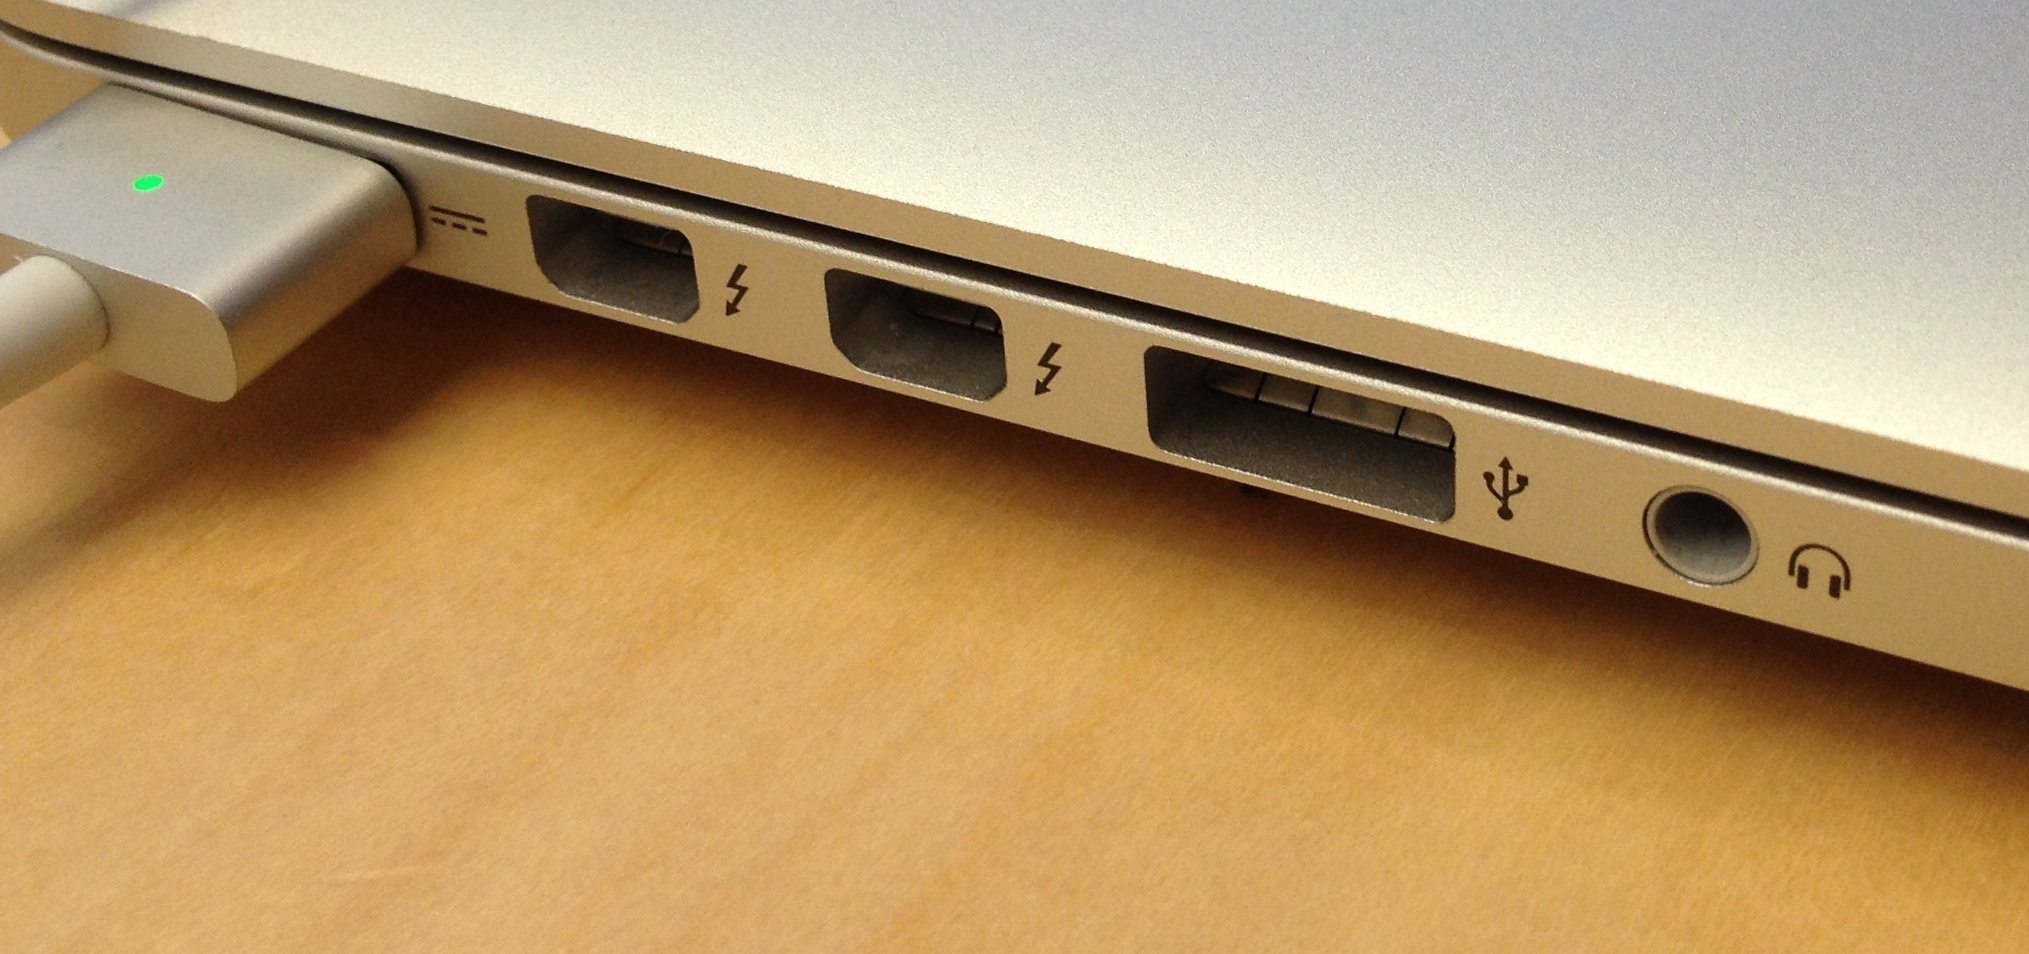 The new MacBook Pro 2013 should look similar, but could deliver better battery life.